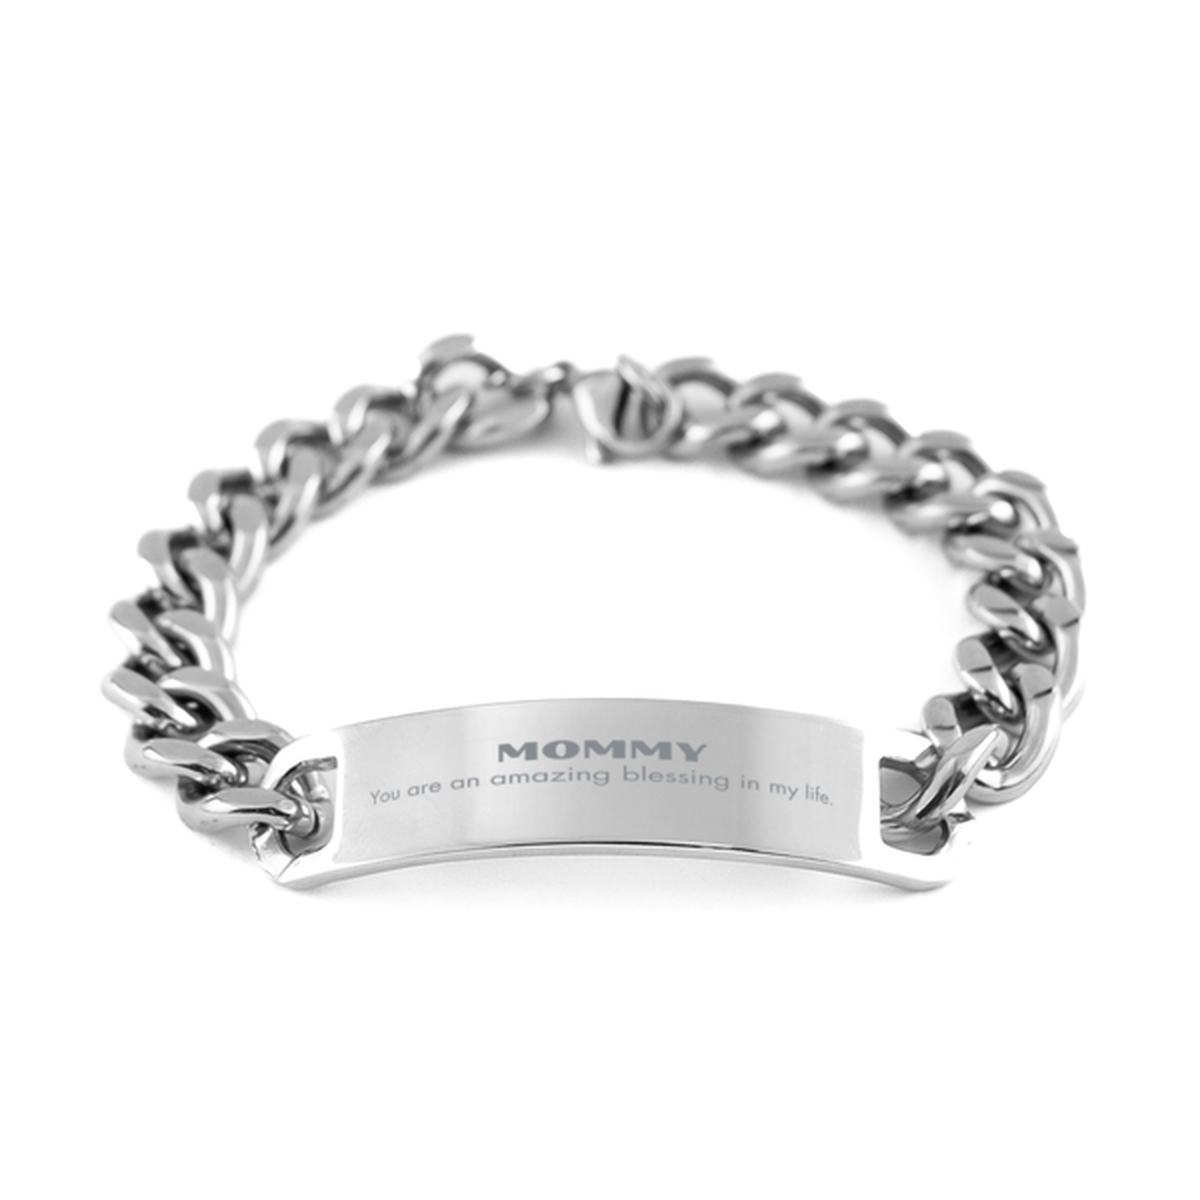 Mommy Cuban Chain Stainless Steel Bracelet, You are an amazing blessing in my life, Thank You Gifts For Mommy, Inspirational Birthday Christmas Unique Gifts For Mommy